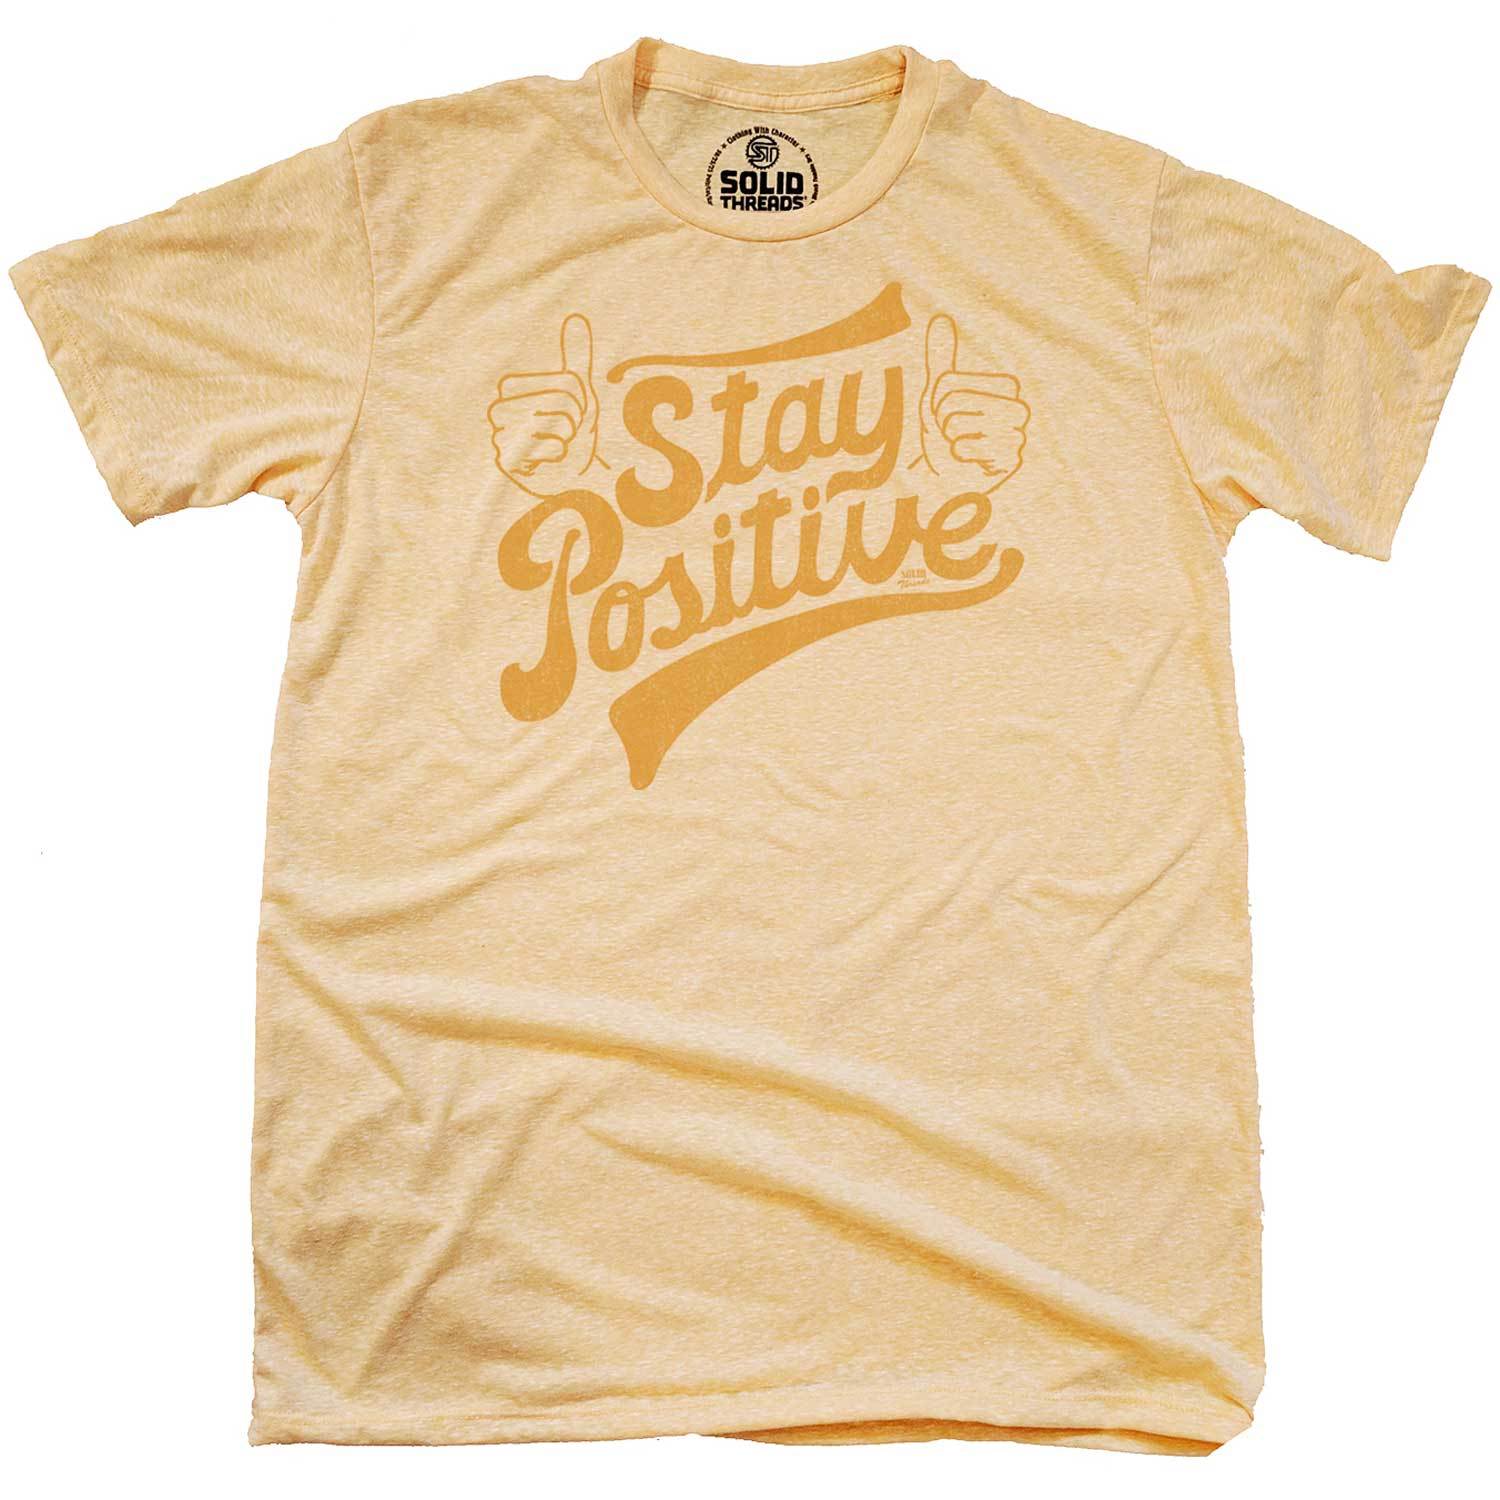 Men's Stay Positive Cool Graphic T-Shirt | Retro Wholesome Happiness Tee | Solid Threads